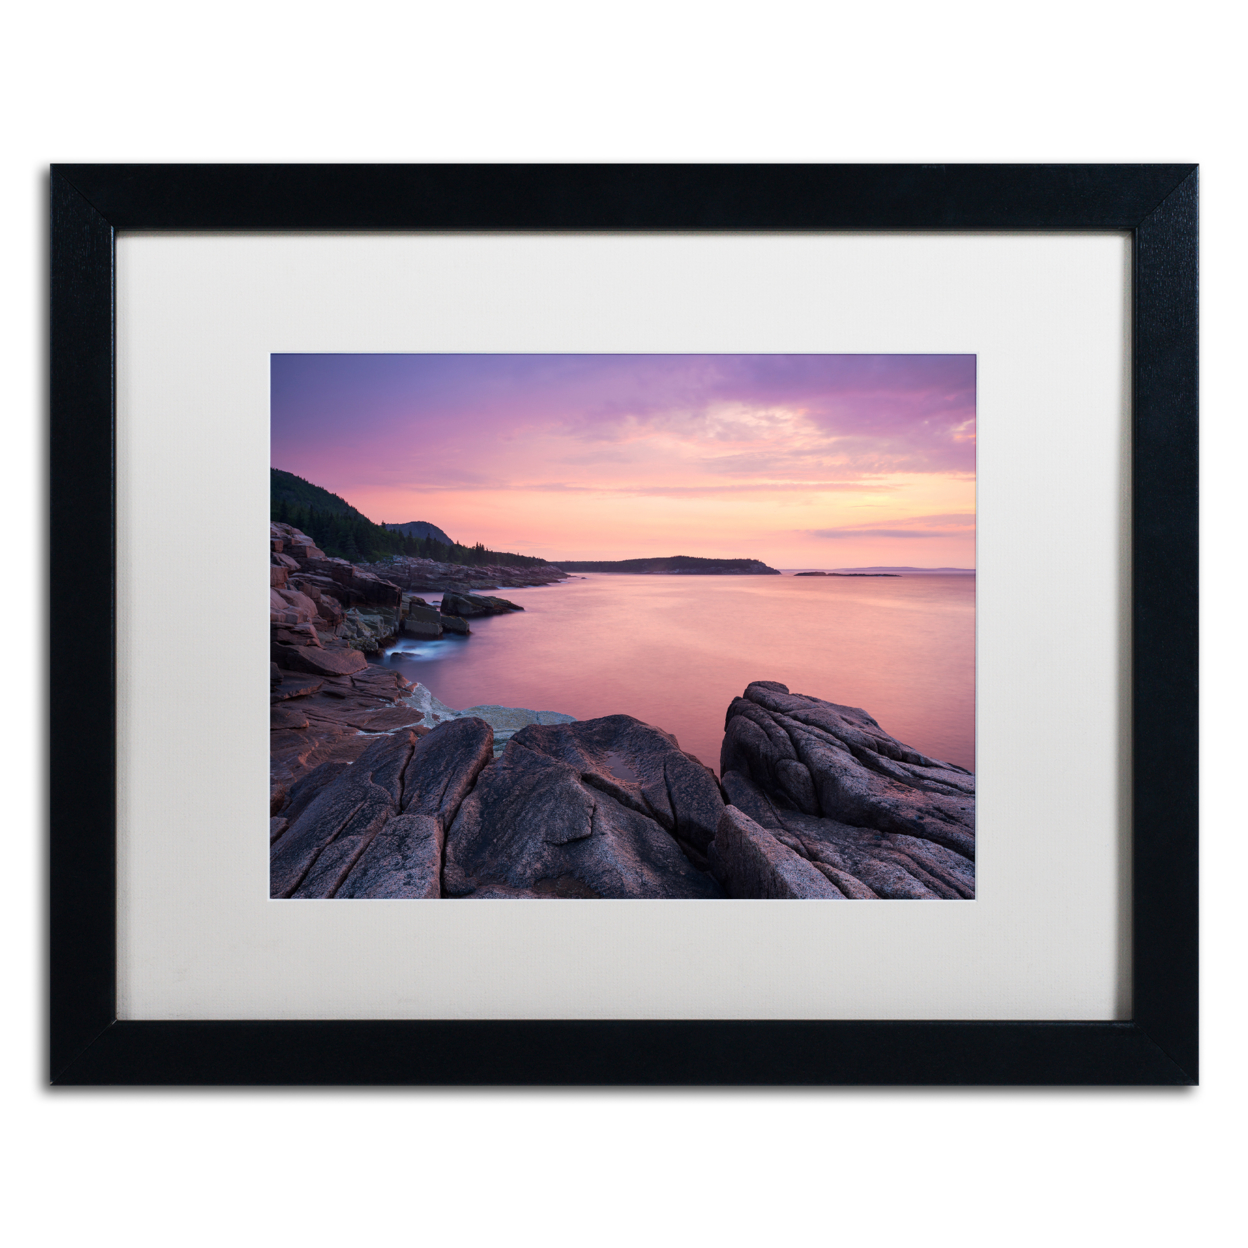 Michael Blanchette Photography 'Pink Dawn' Black Wooden Framed Art 18 X 22 Inches